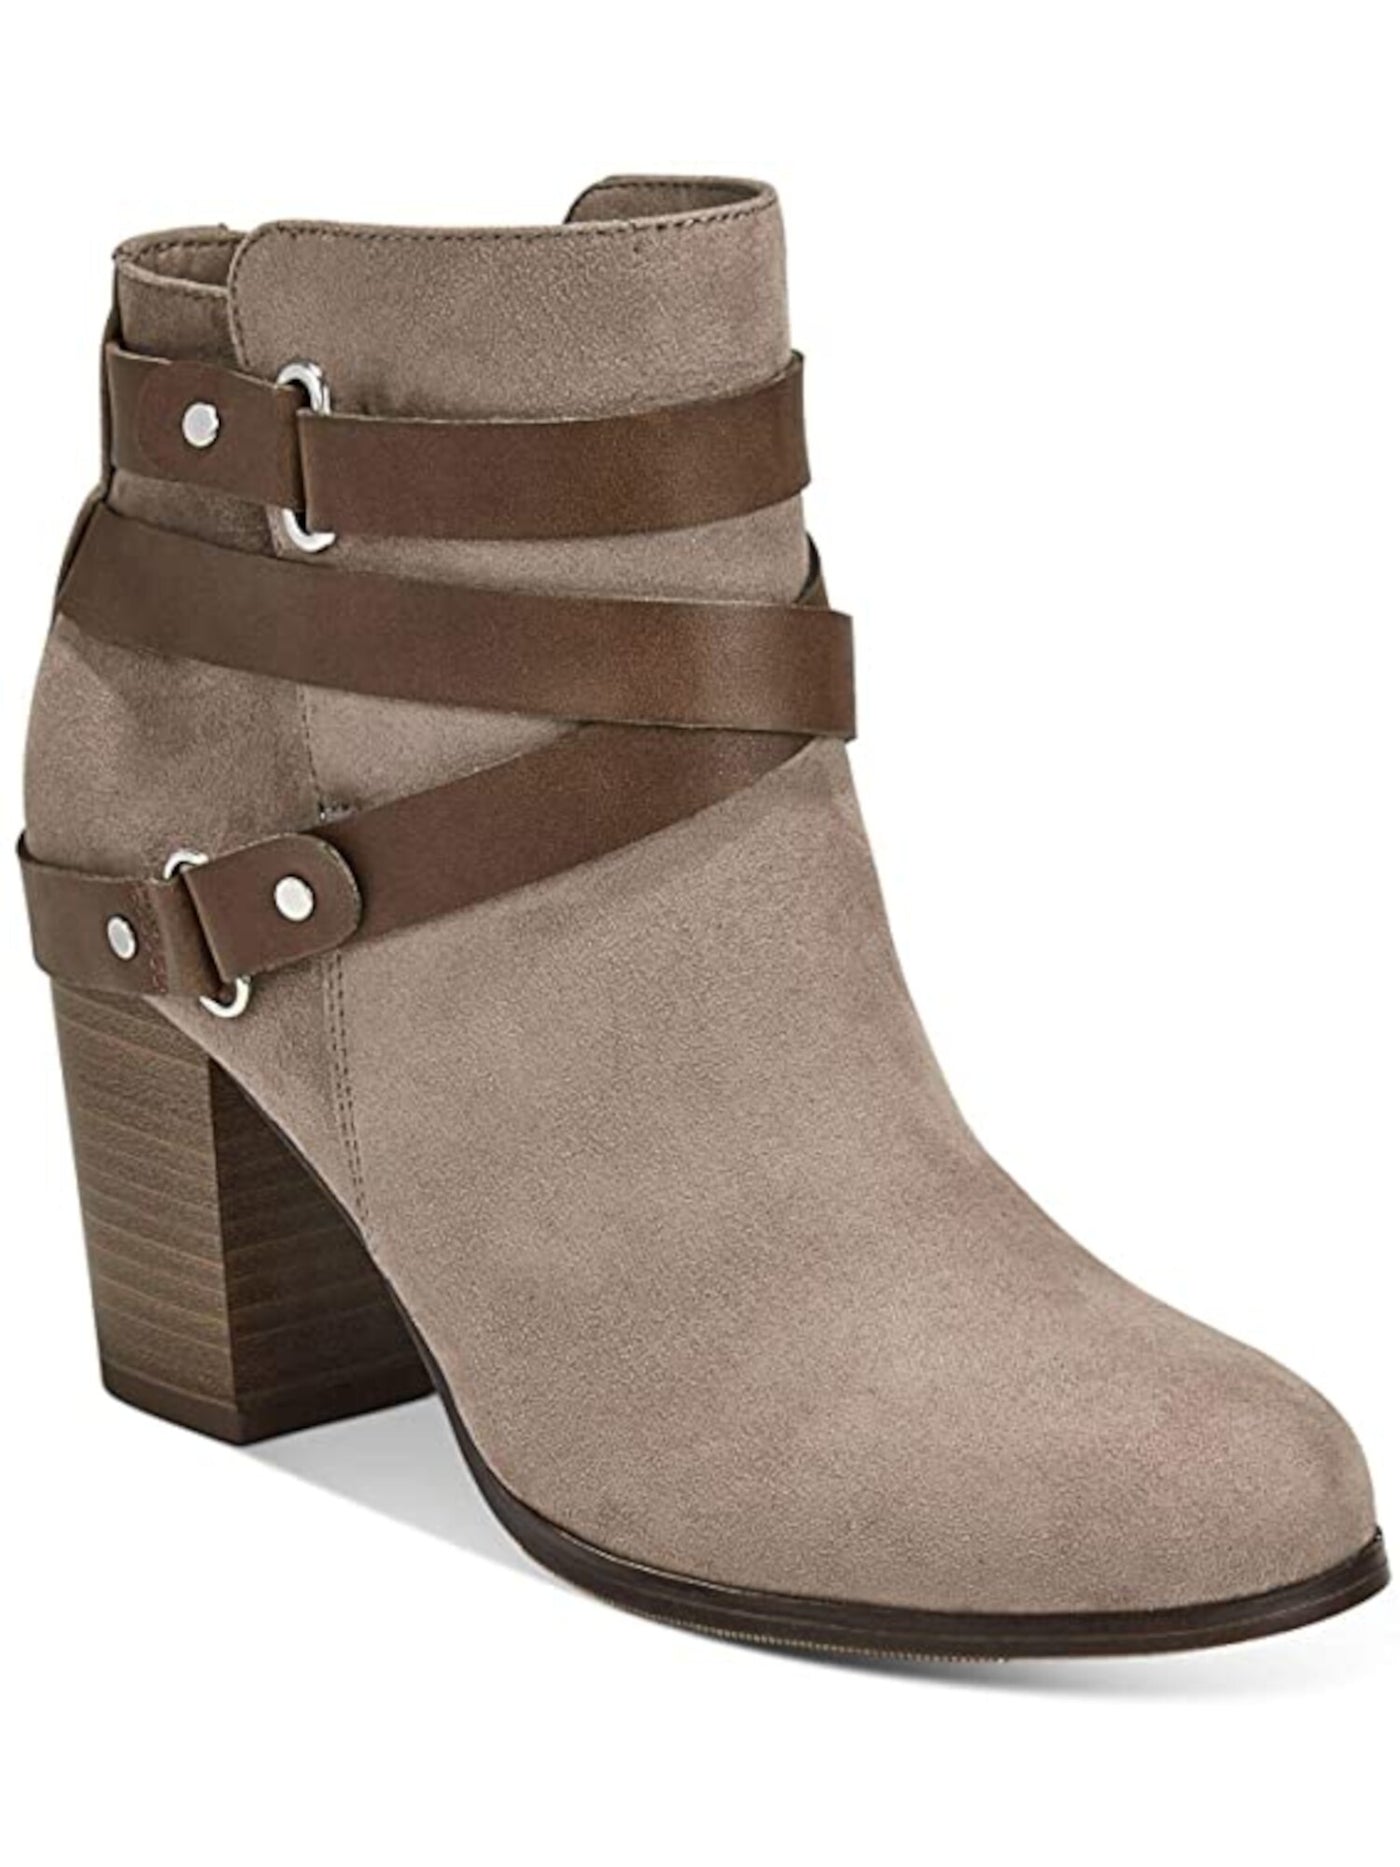 MATERIAL GIRL Womens Beige Buckled Strap Hardware Cushioned Strappy Melany Round Toe Block Heel Zip-Up Booties 8 M